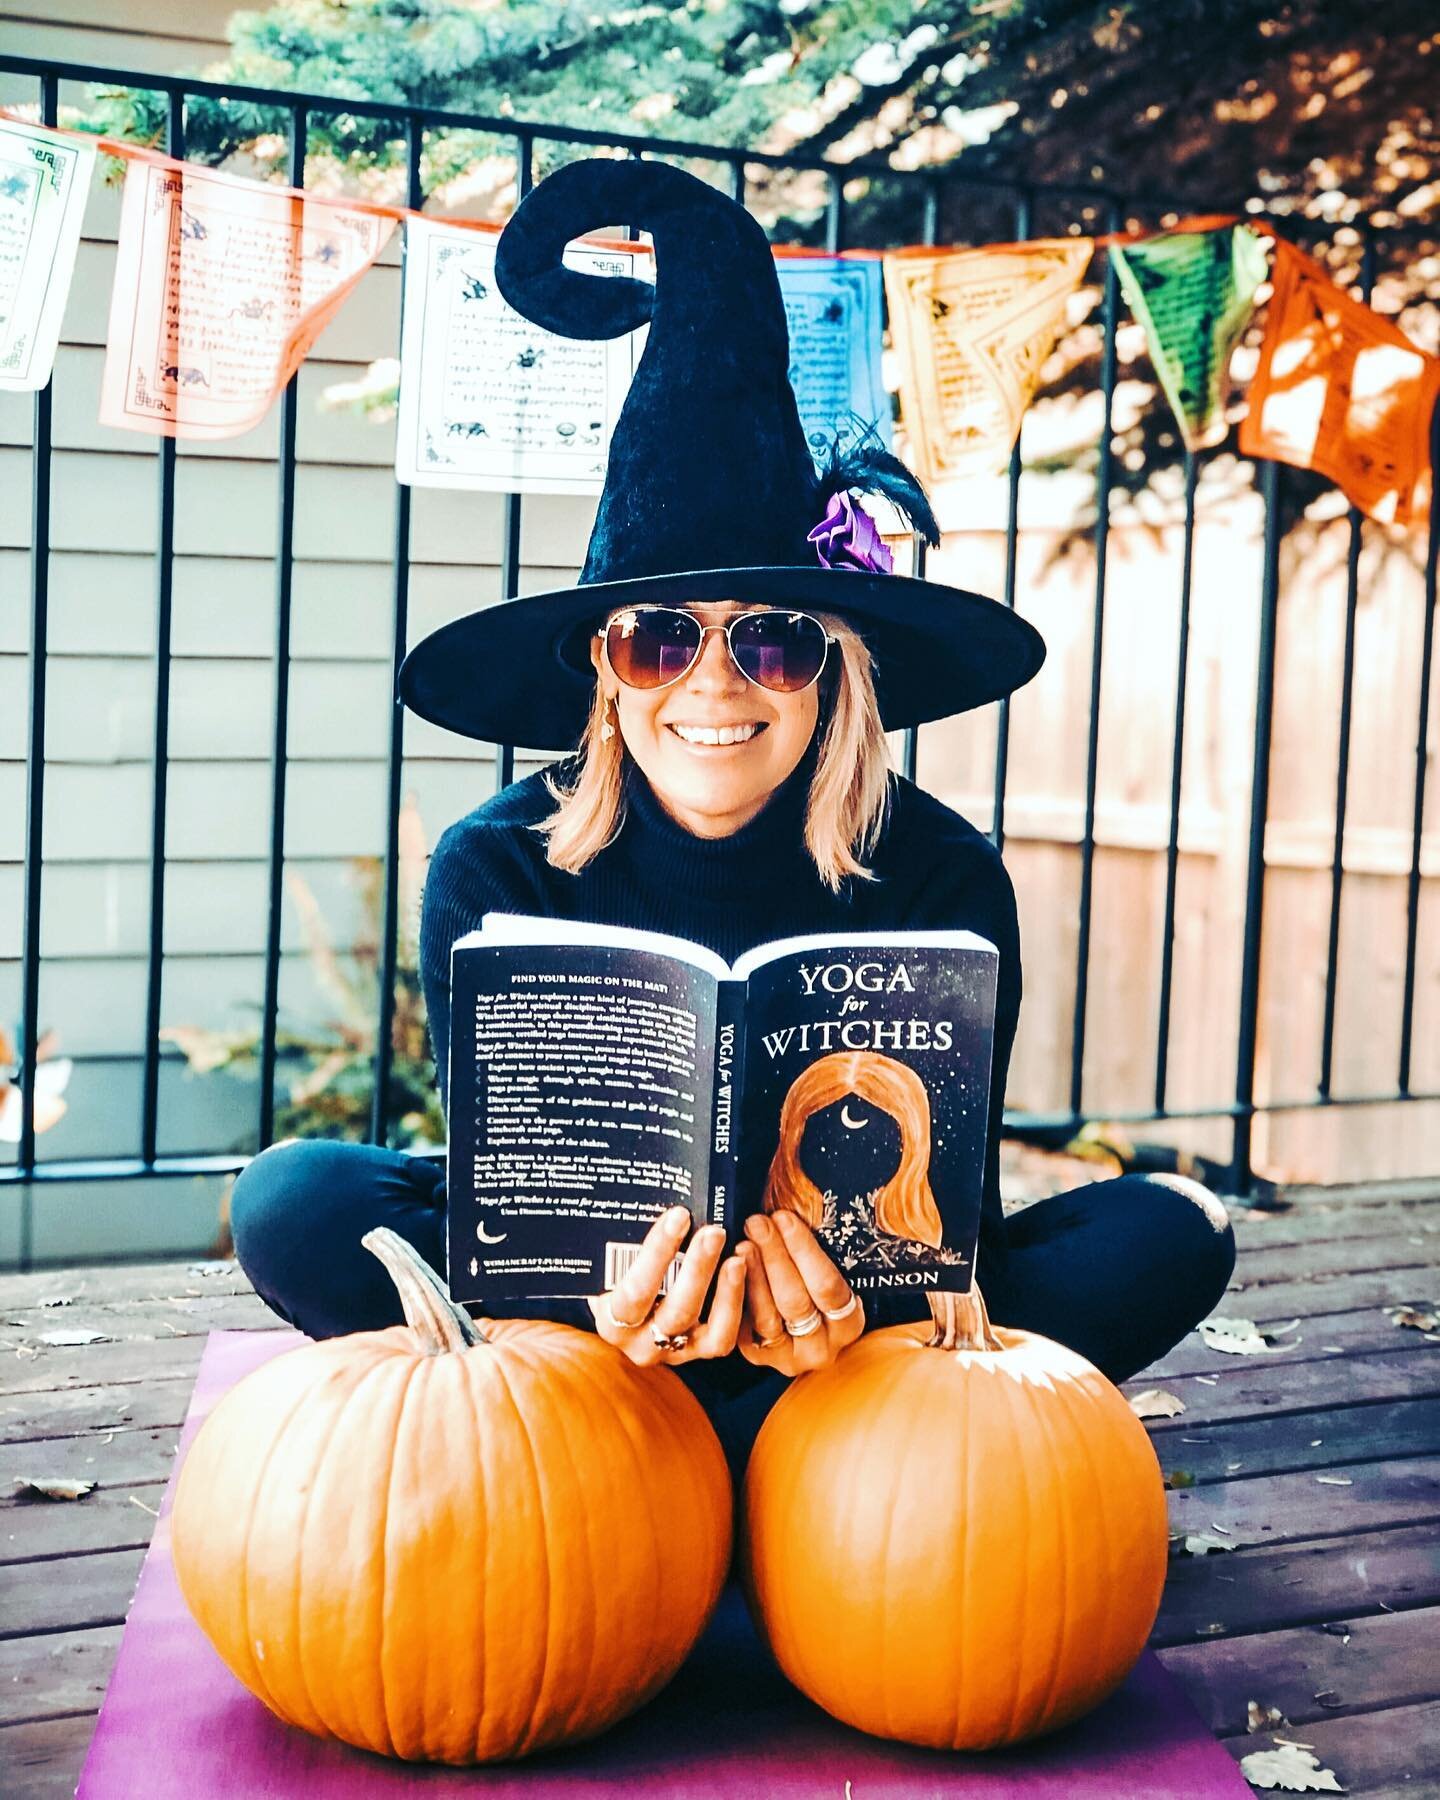 Samhain blessings and Happy Halloween! 

If you are celebrating with children today take a look at my blog post &ldquo;Celebrating Samhain with Children - Bringing depth and intention to Halloween.&rdquo; I share some of our rituals and experiences o